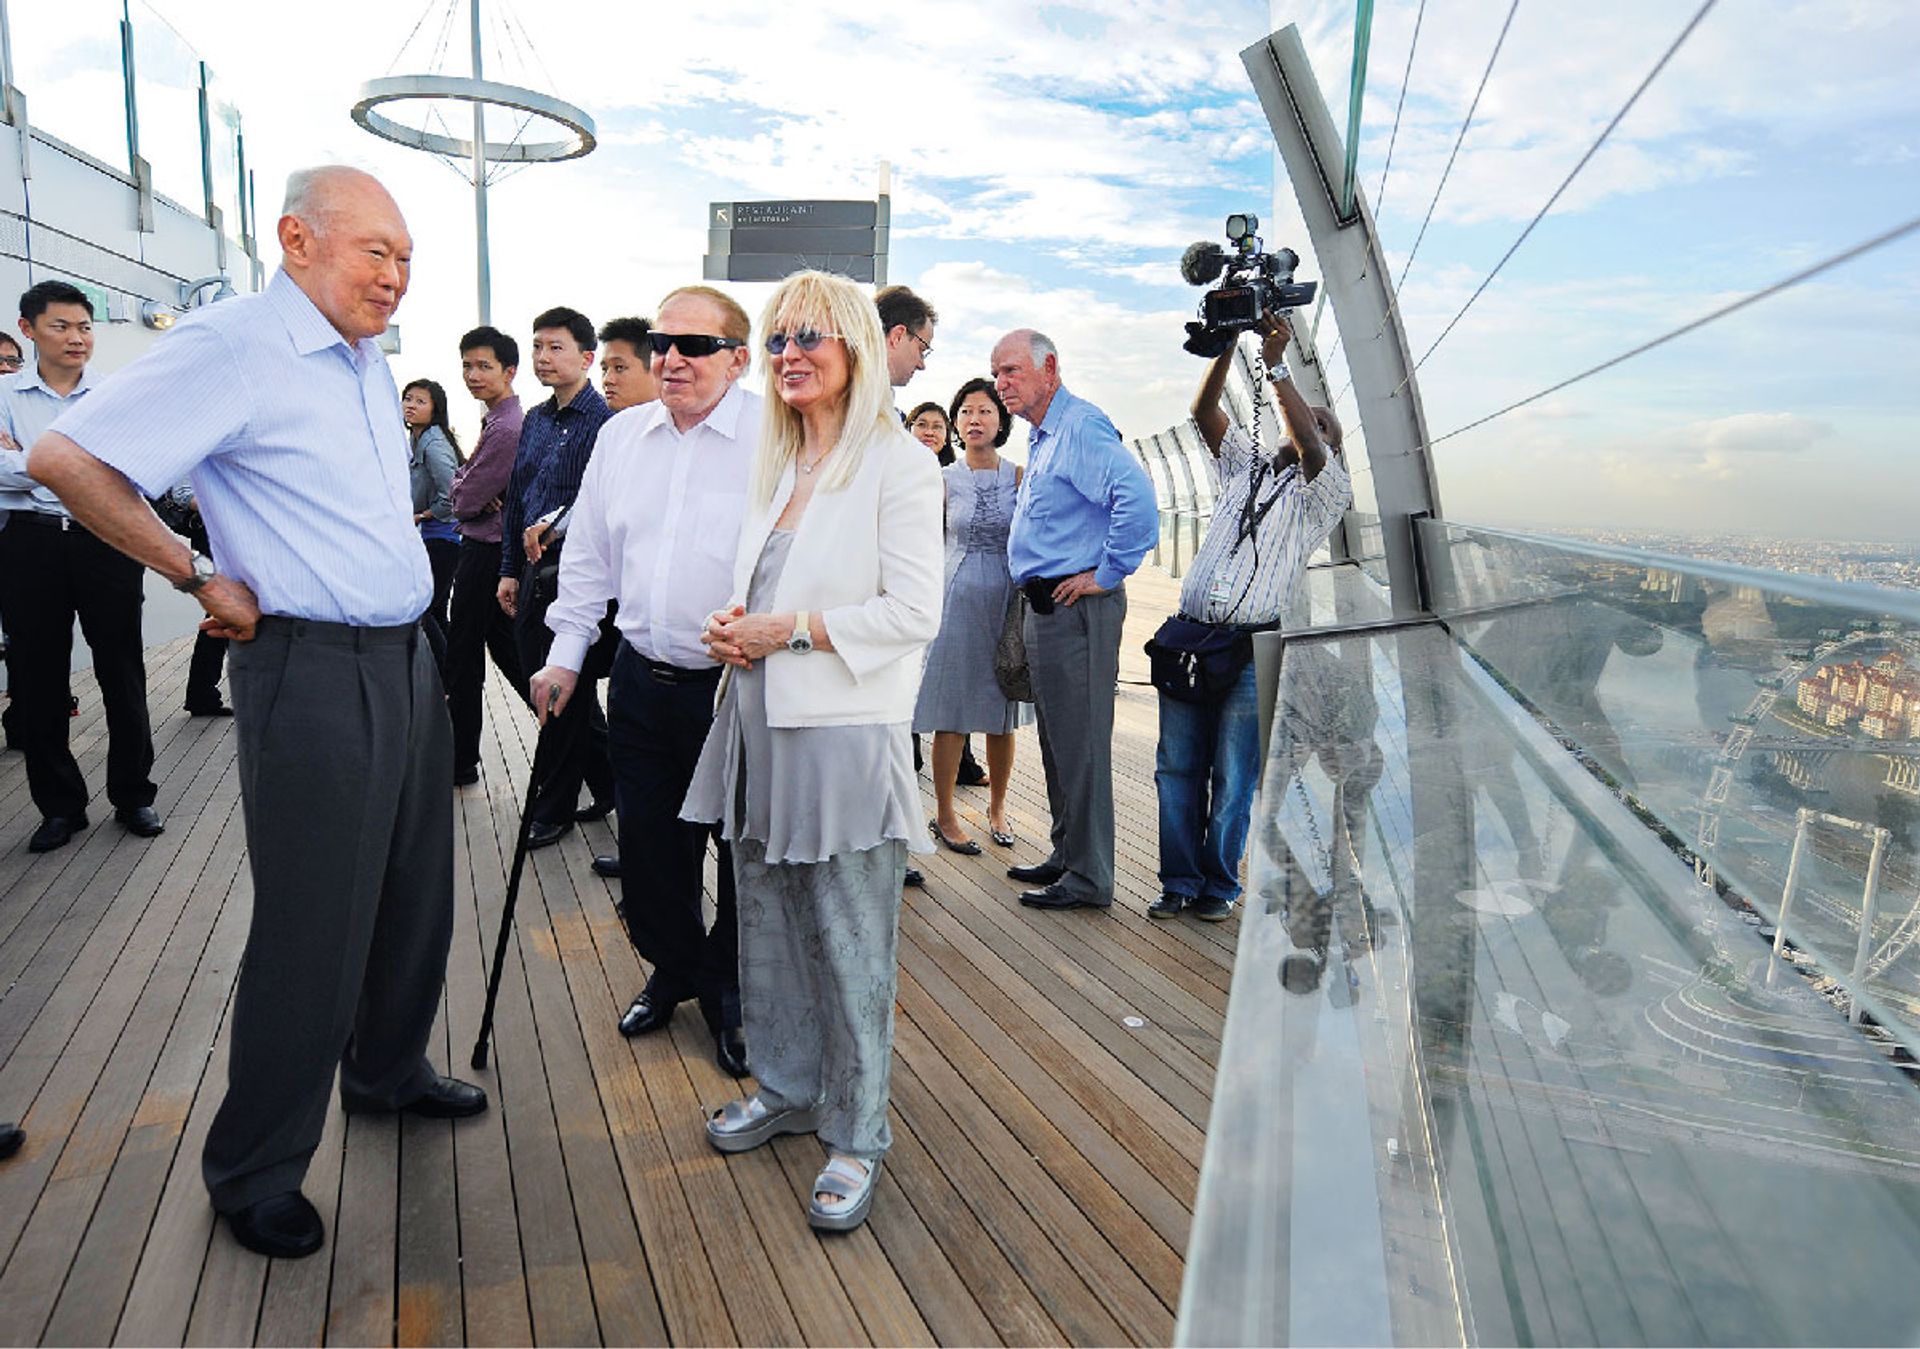 Taking in the view from Marina Bay Sands’ (MBS) SkyPark Observation Deck on June 22, 2010. With him are Mr Sheldon Adelson (with cane), president and chief executive of Las Vegas Sands, which developed MBS, and his wife Miriam. ST Photo: Caroline Chia